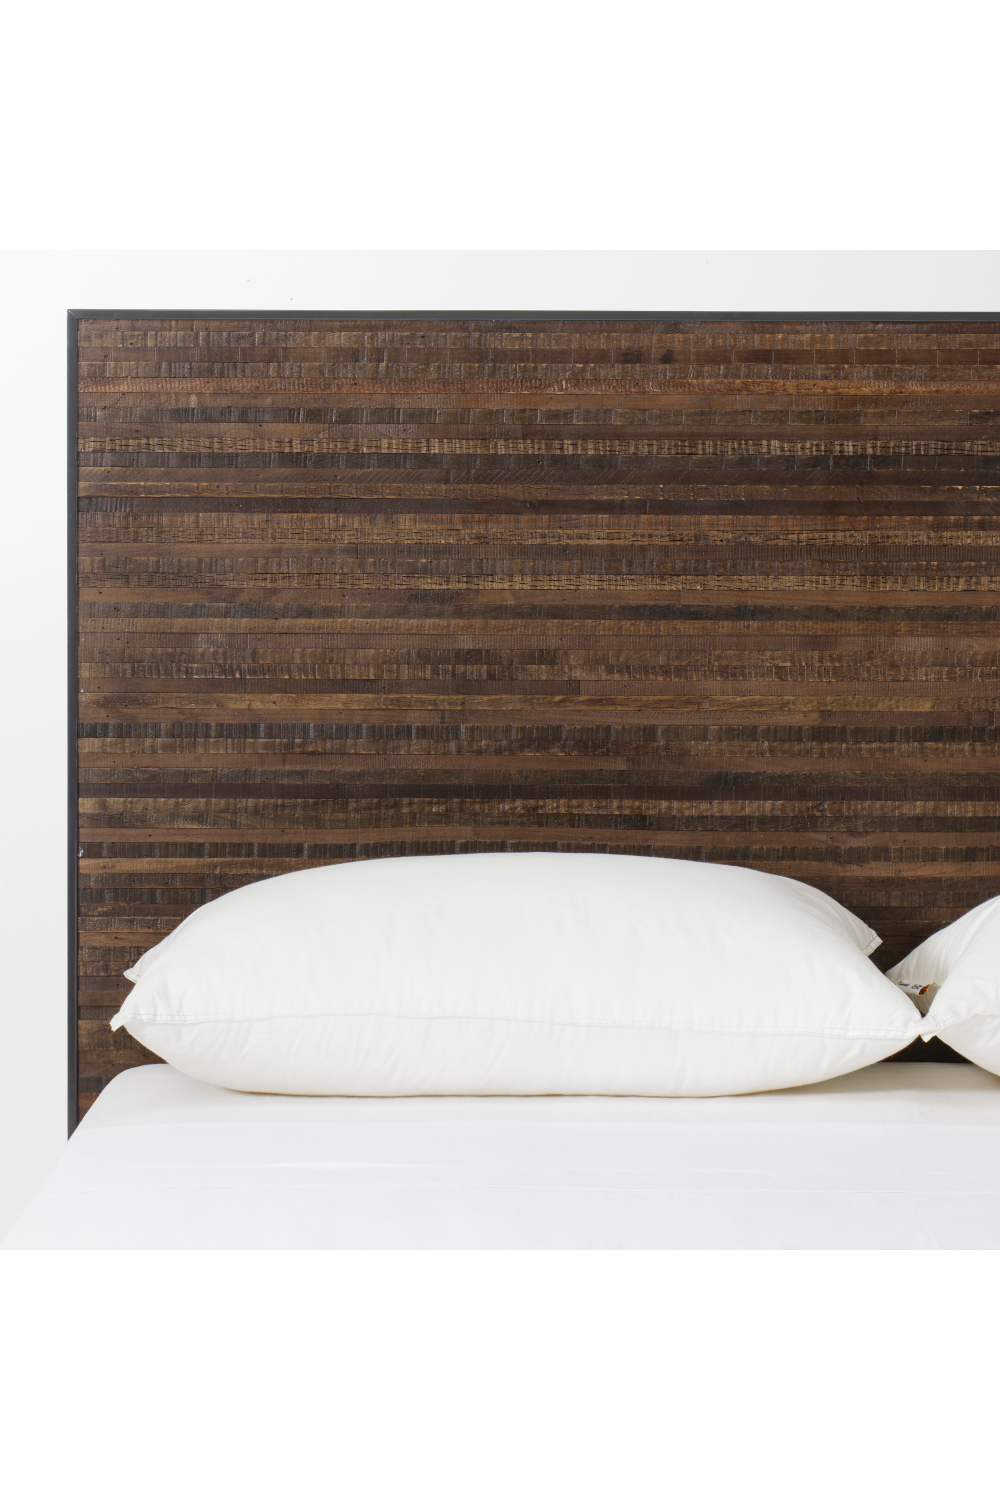 Weathered Peroba Queen Bed | Andrew Martin Zuma | OROA